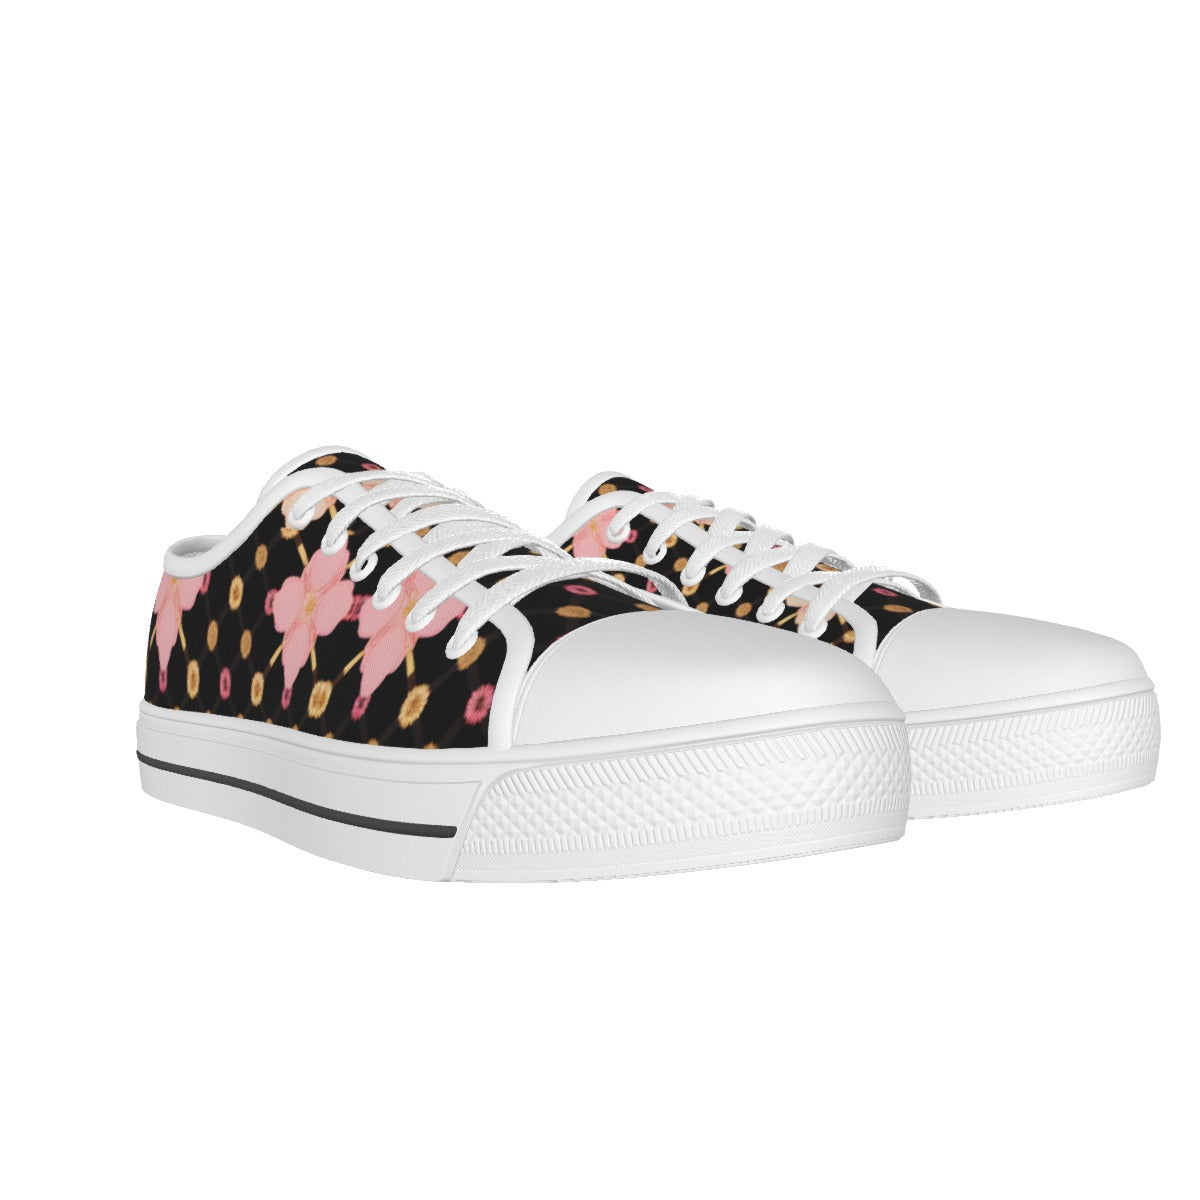 AC KAMI OUPE Women's White Sole Canvas Shoes